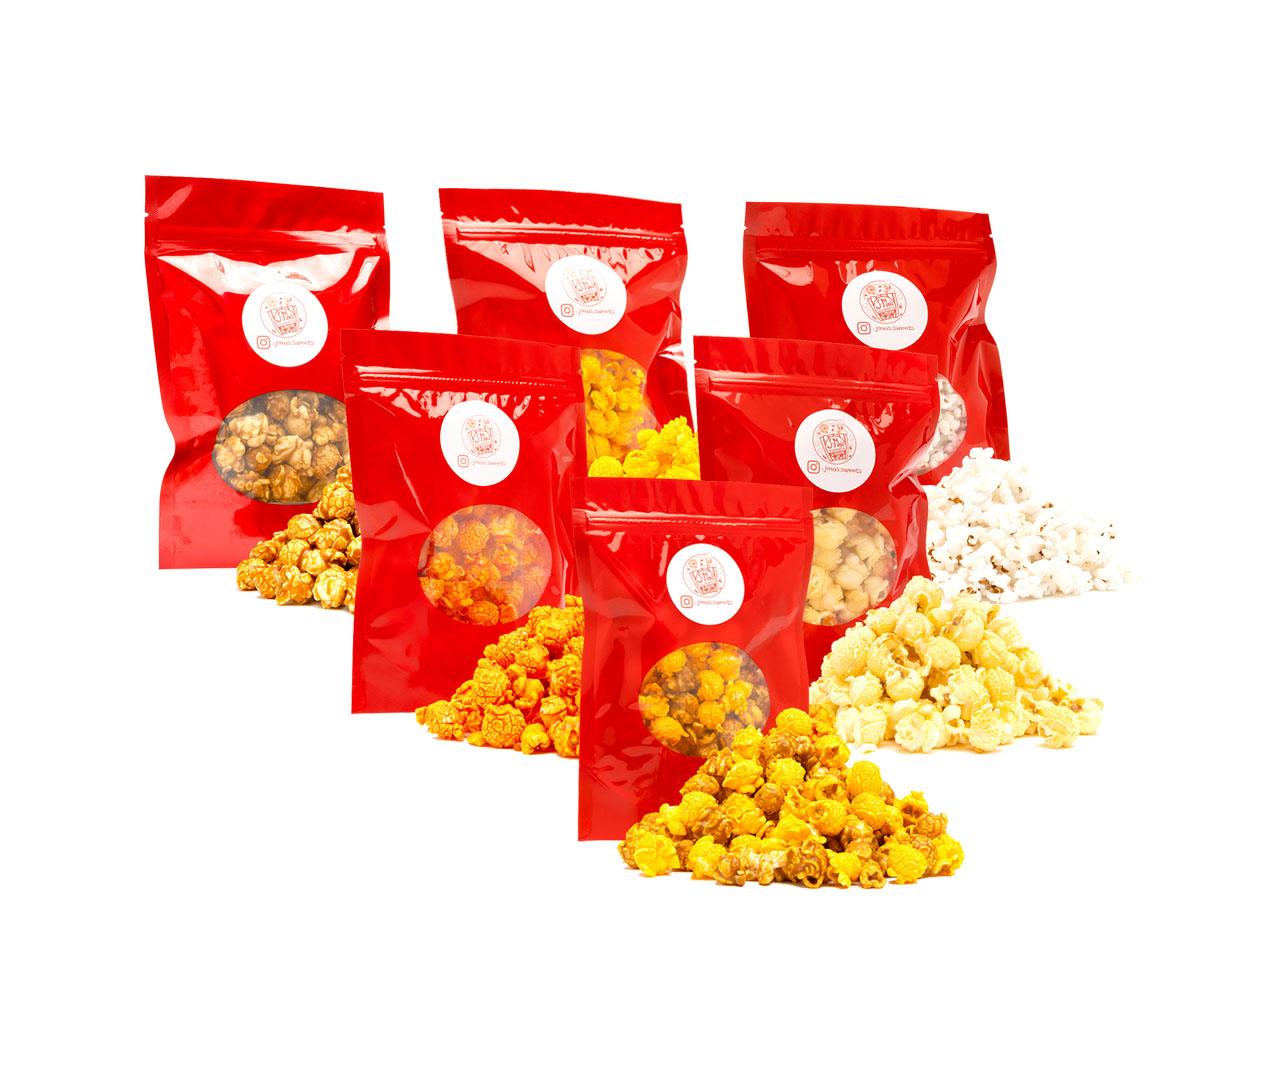 PopStar Variety Popcorn 6 Pack - J-Mo's Sweets & More